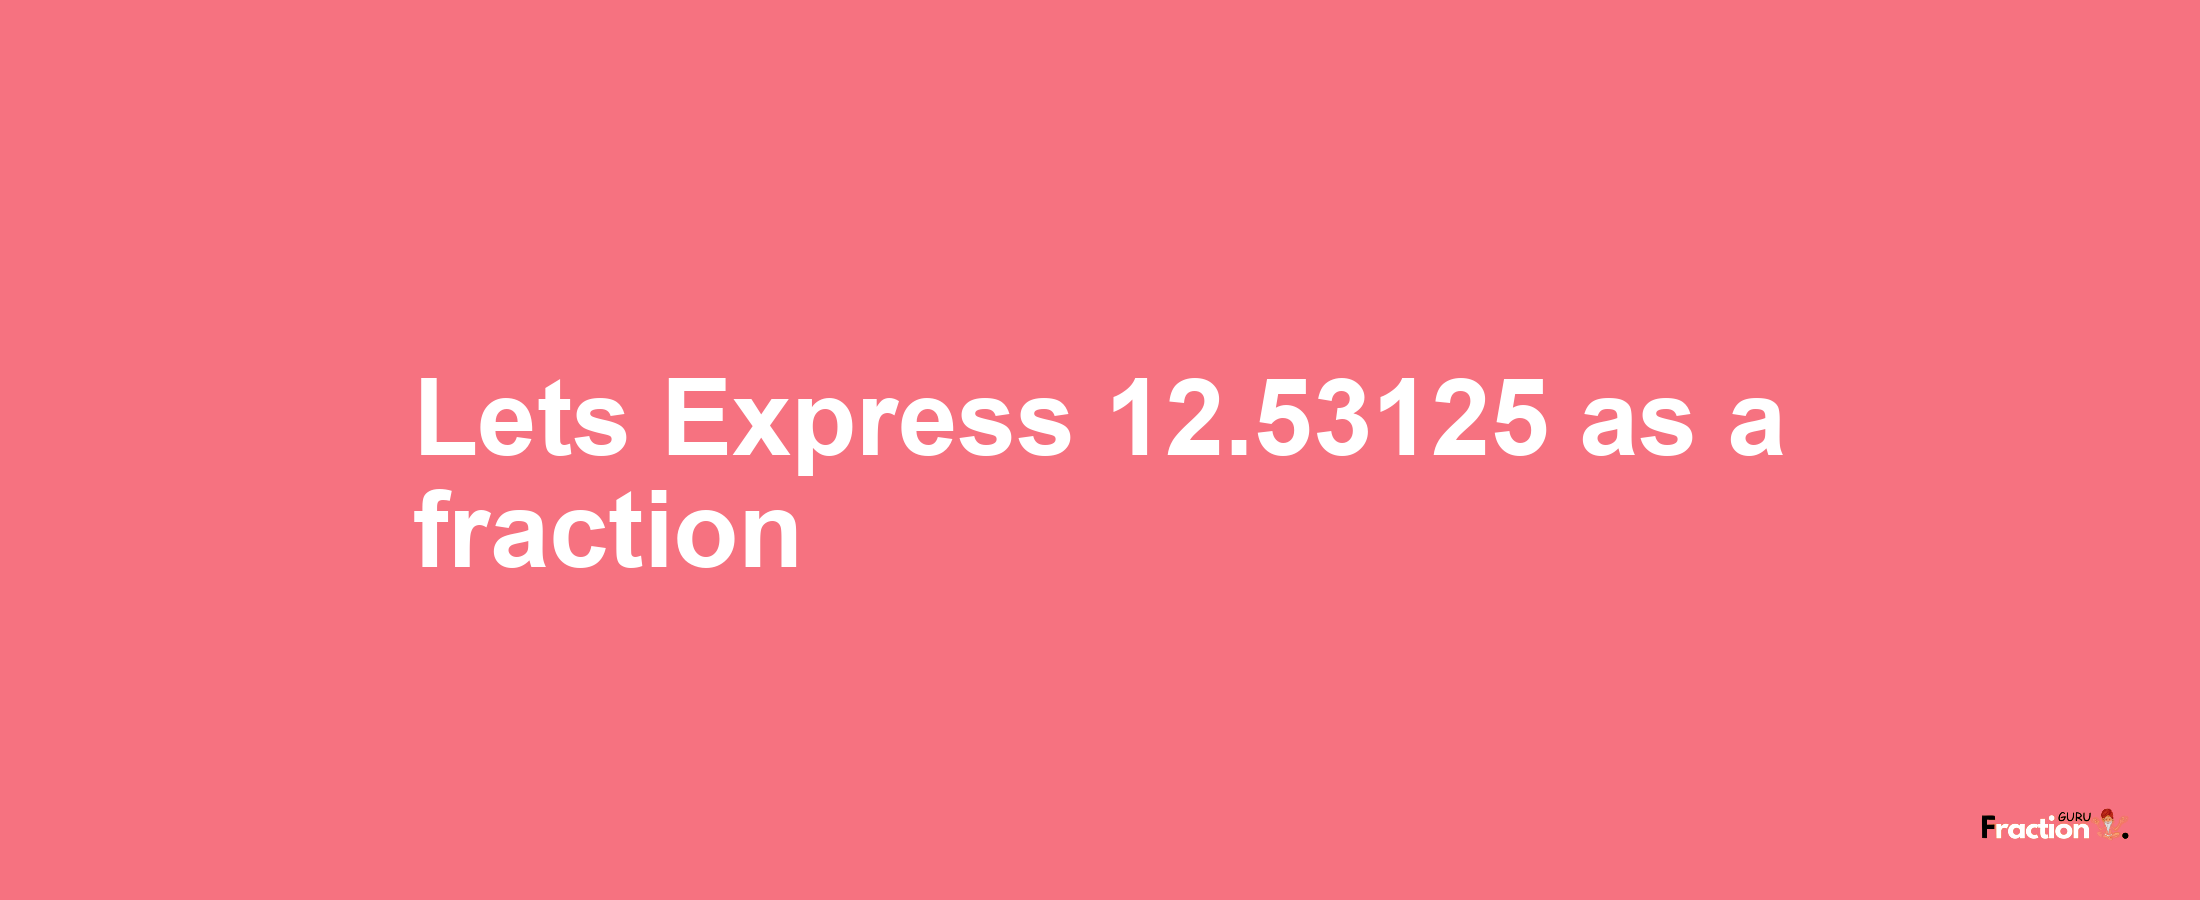 Lets Express 12.53125 as afraction